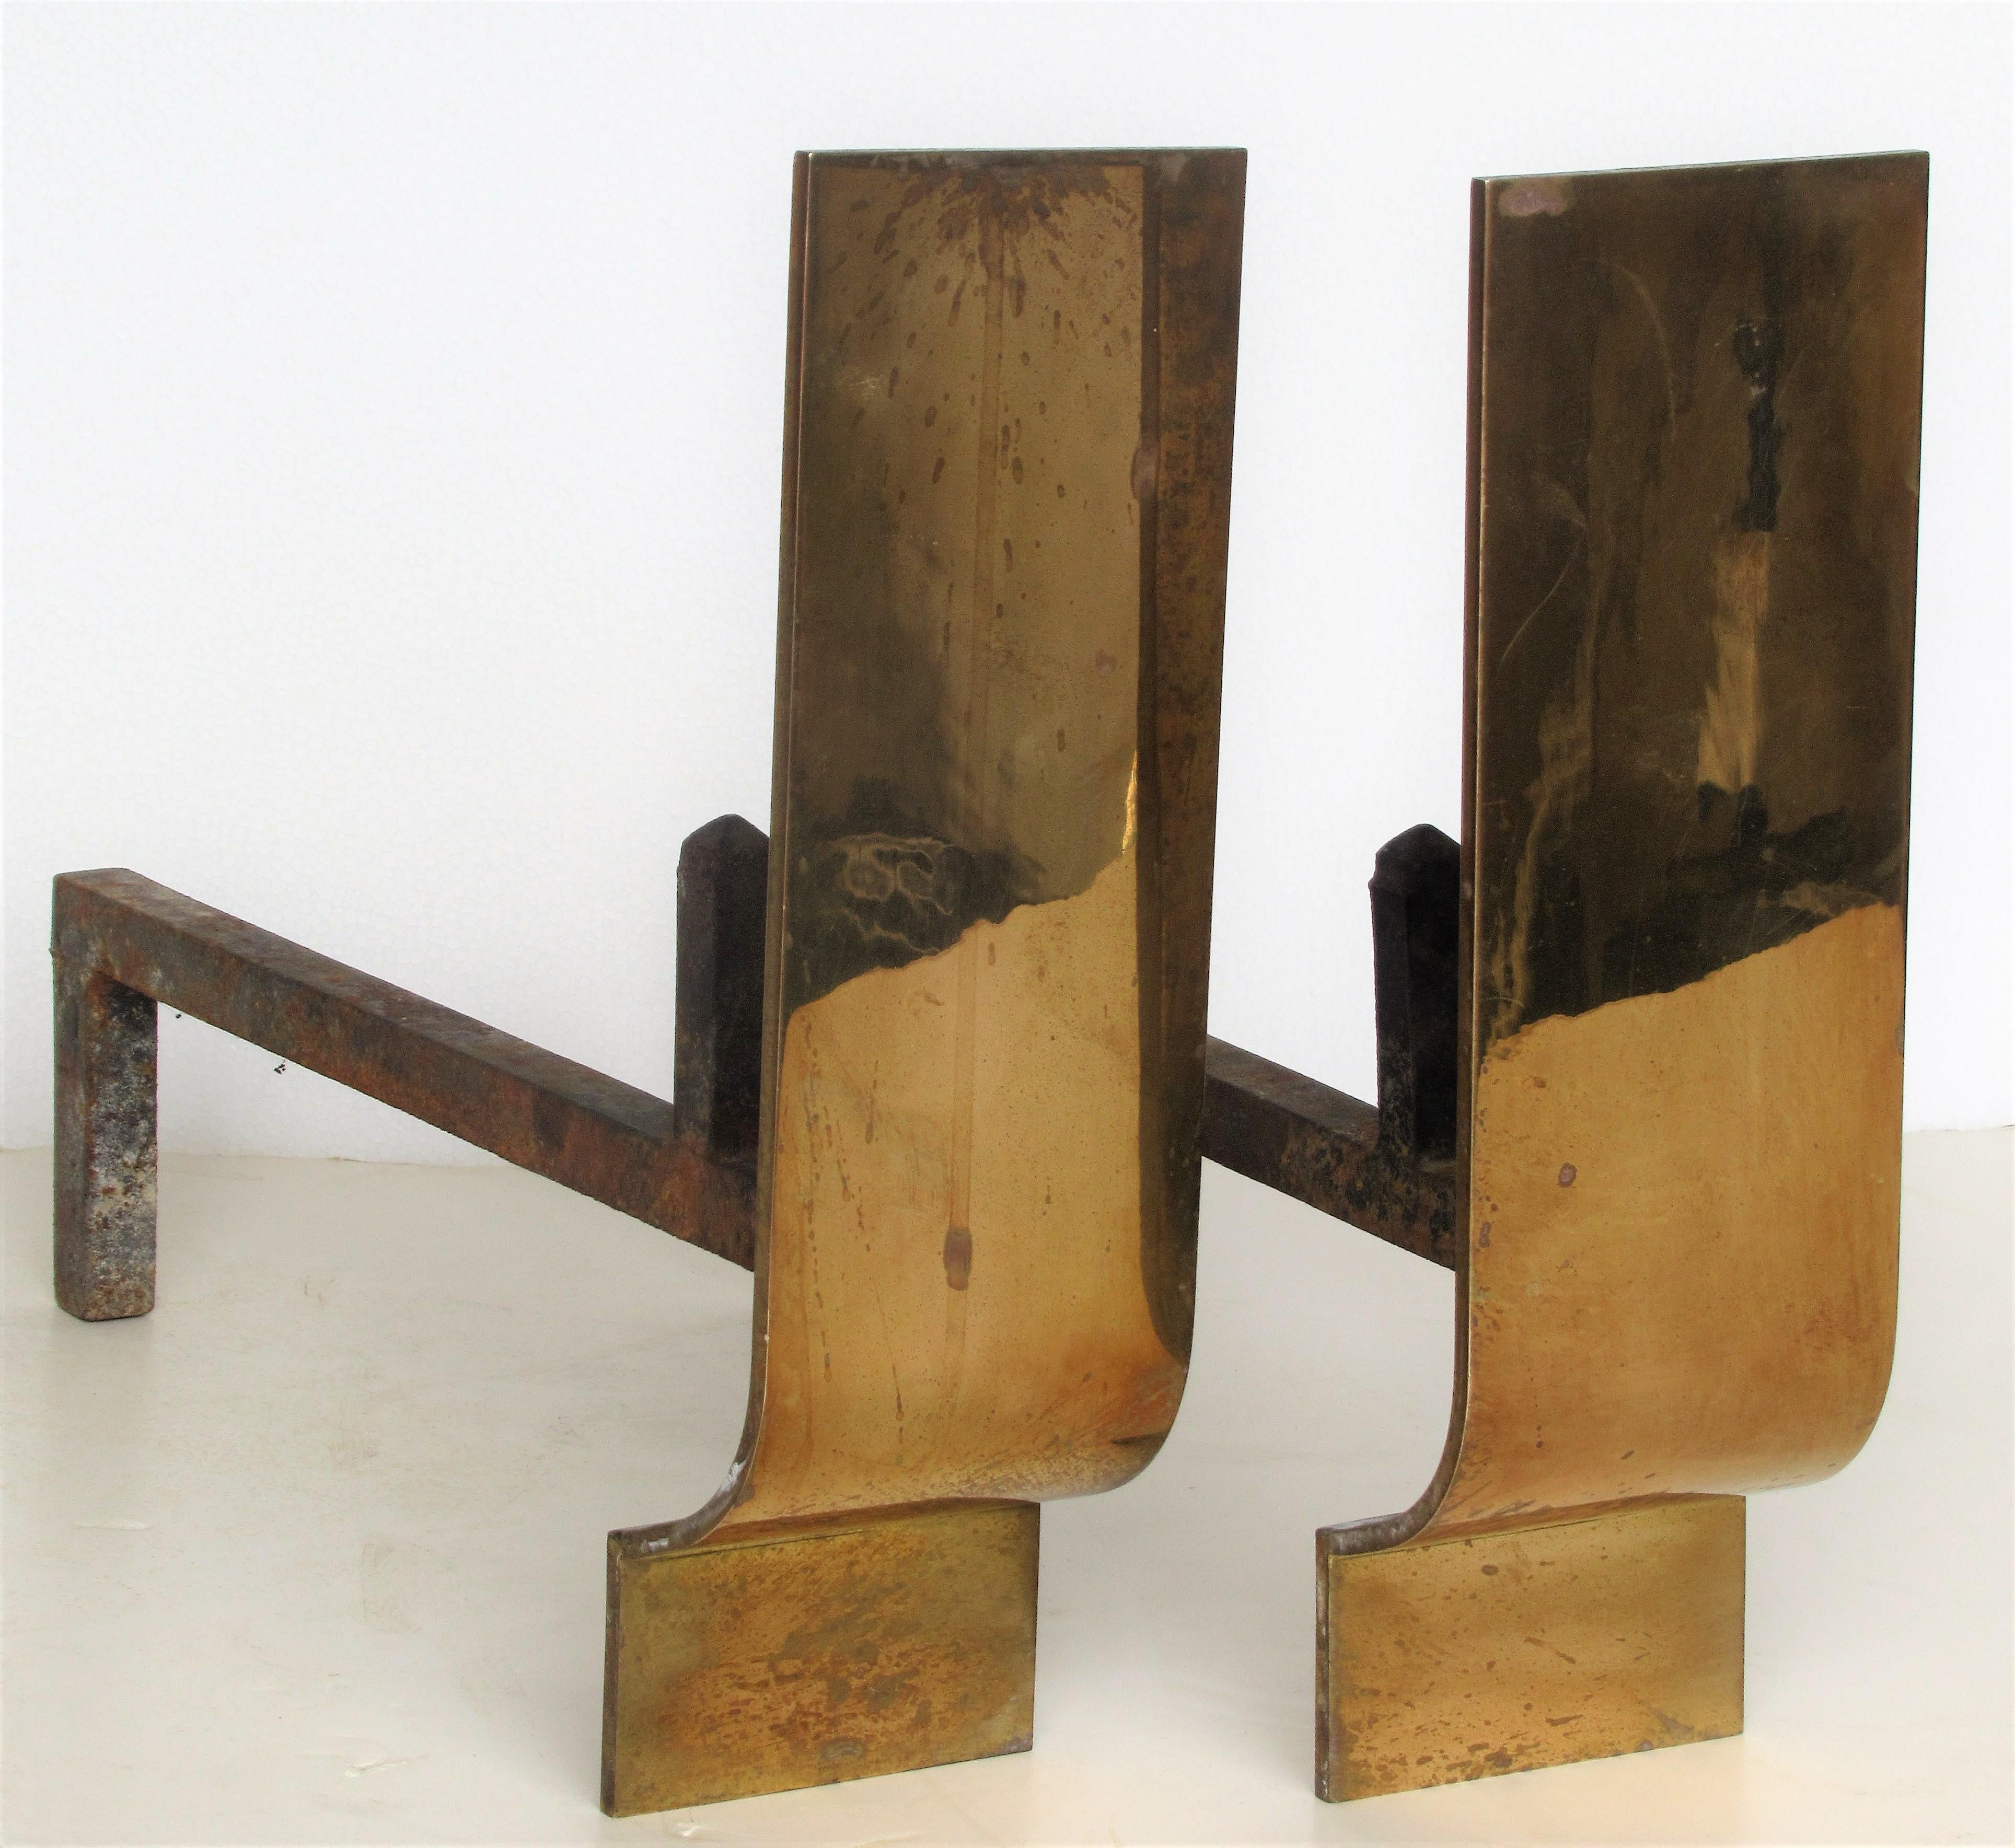 A pair of modernist bronze and iron andirons with a beautiful austere sculptural form, circa 1960-1970.